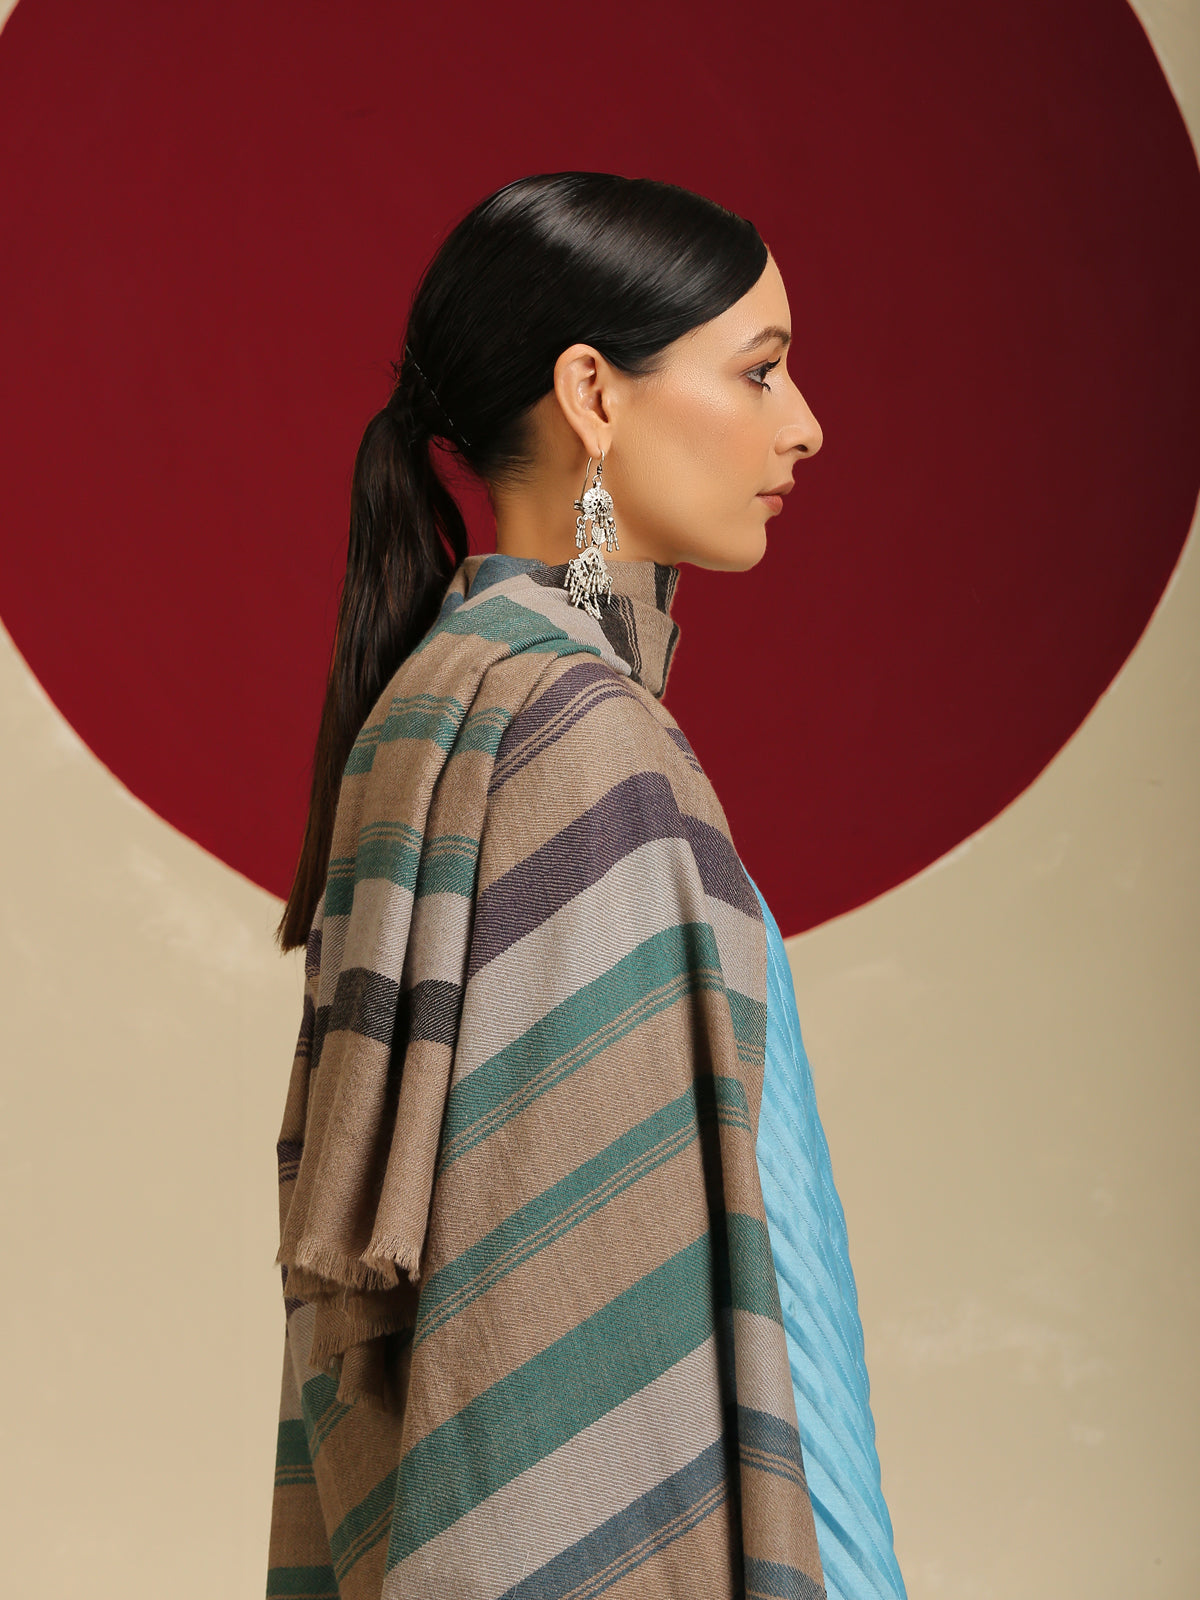 Model is wearing a Pashmina check stole in green and purple stripes.